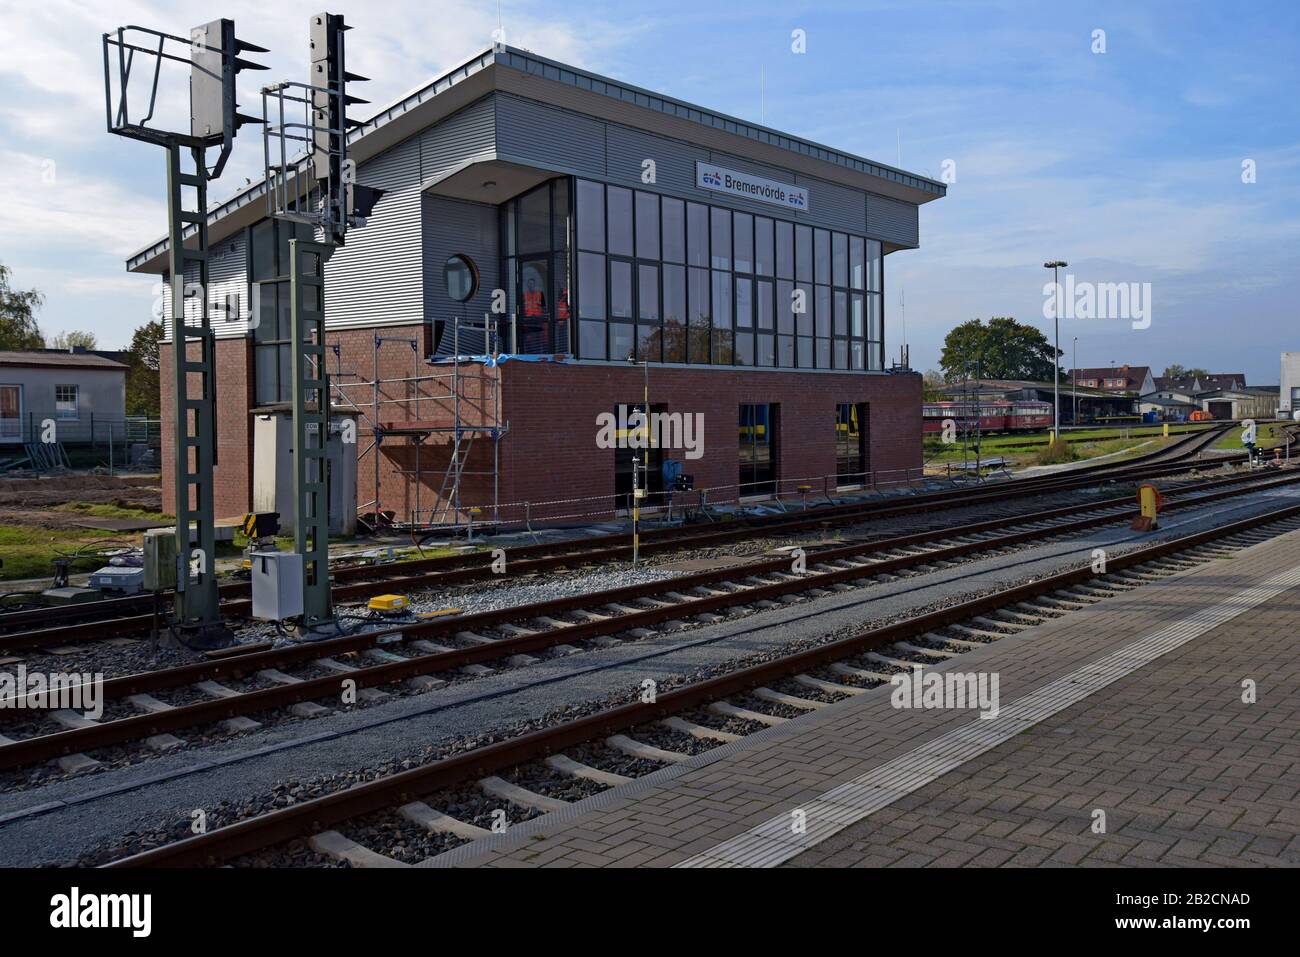 New build signal box and railway control centre in Bremervorde, Germany Stock Photo